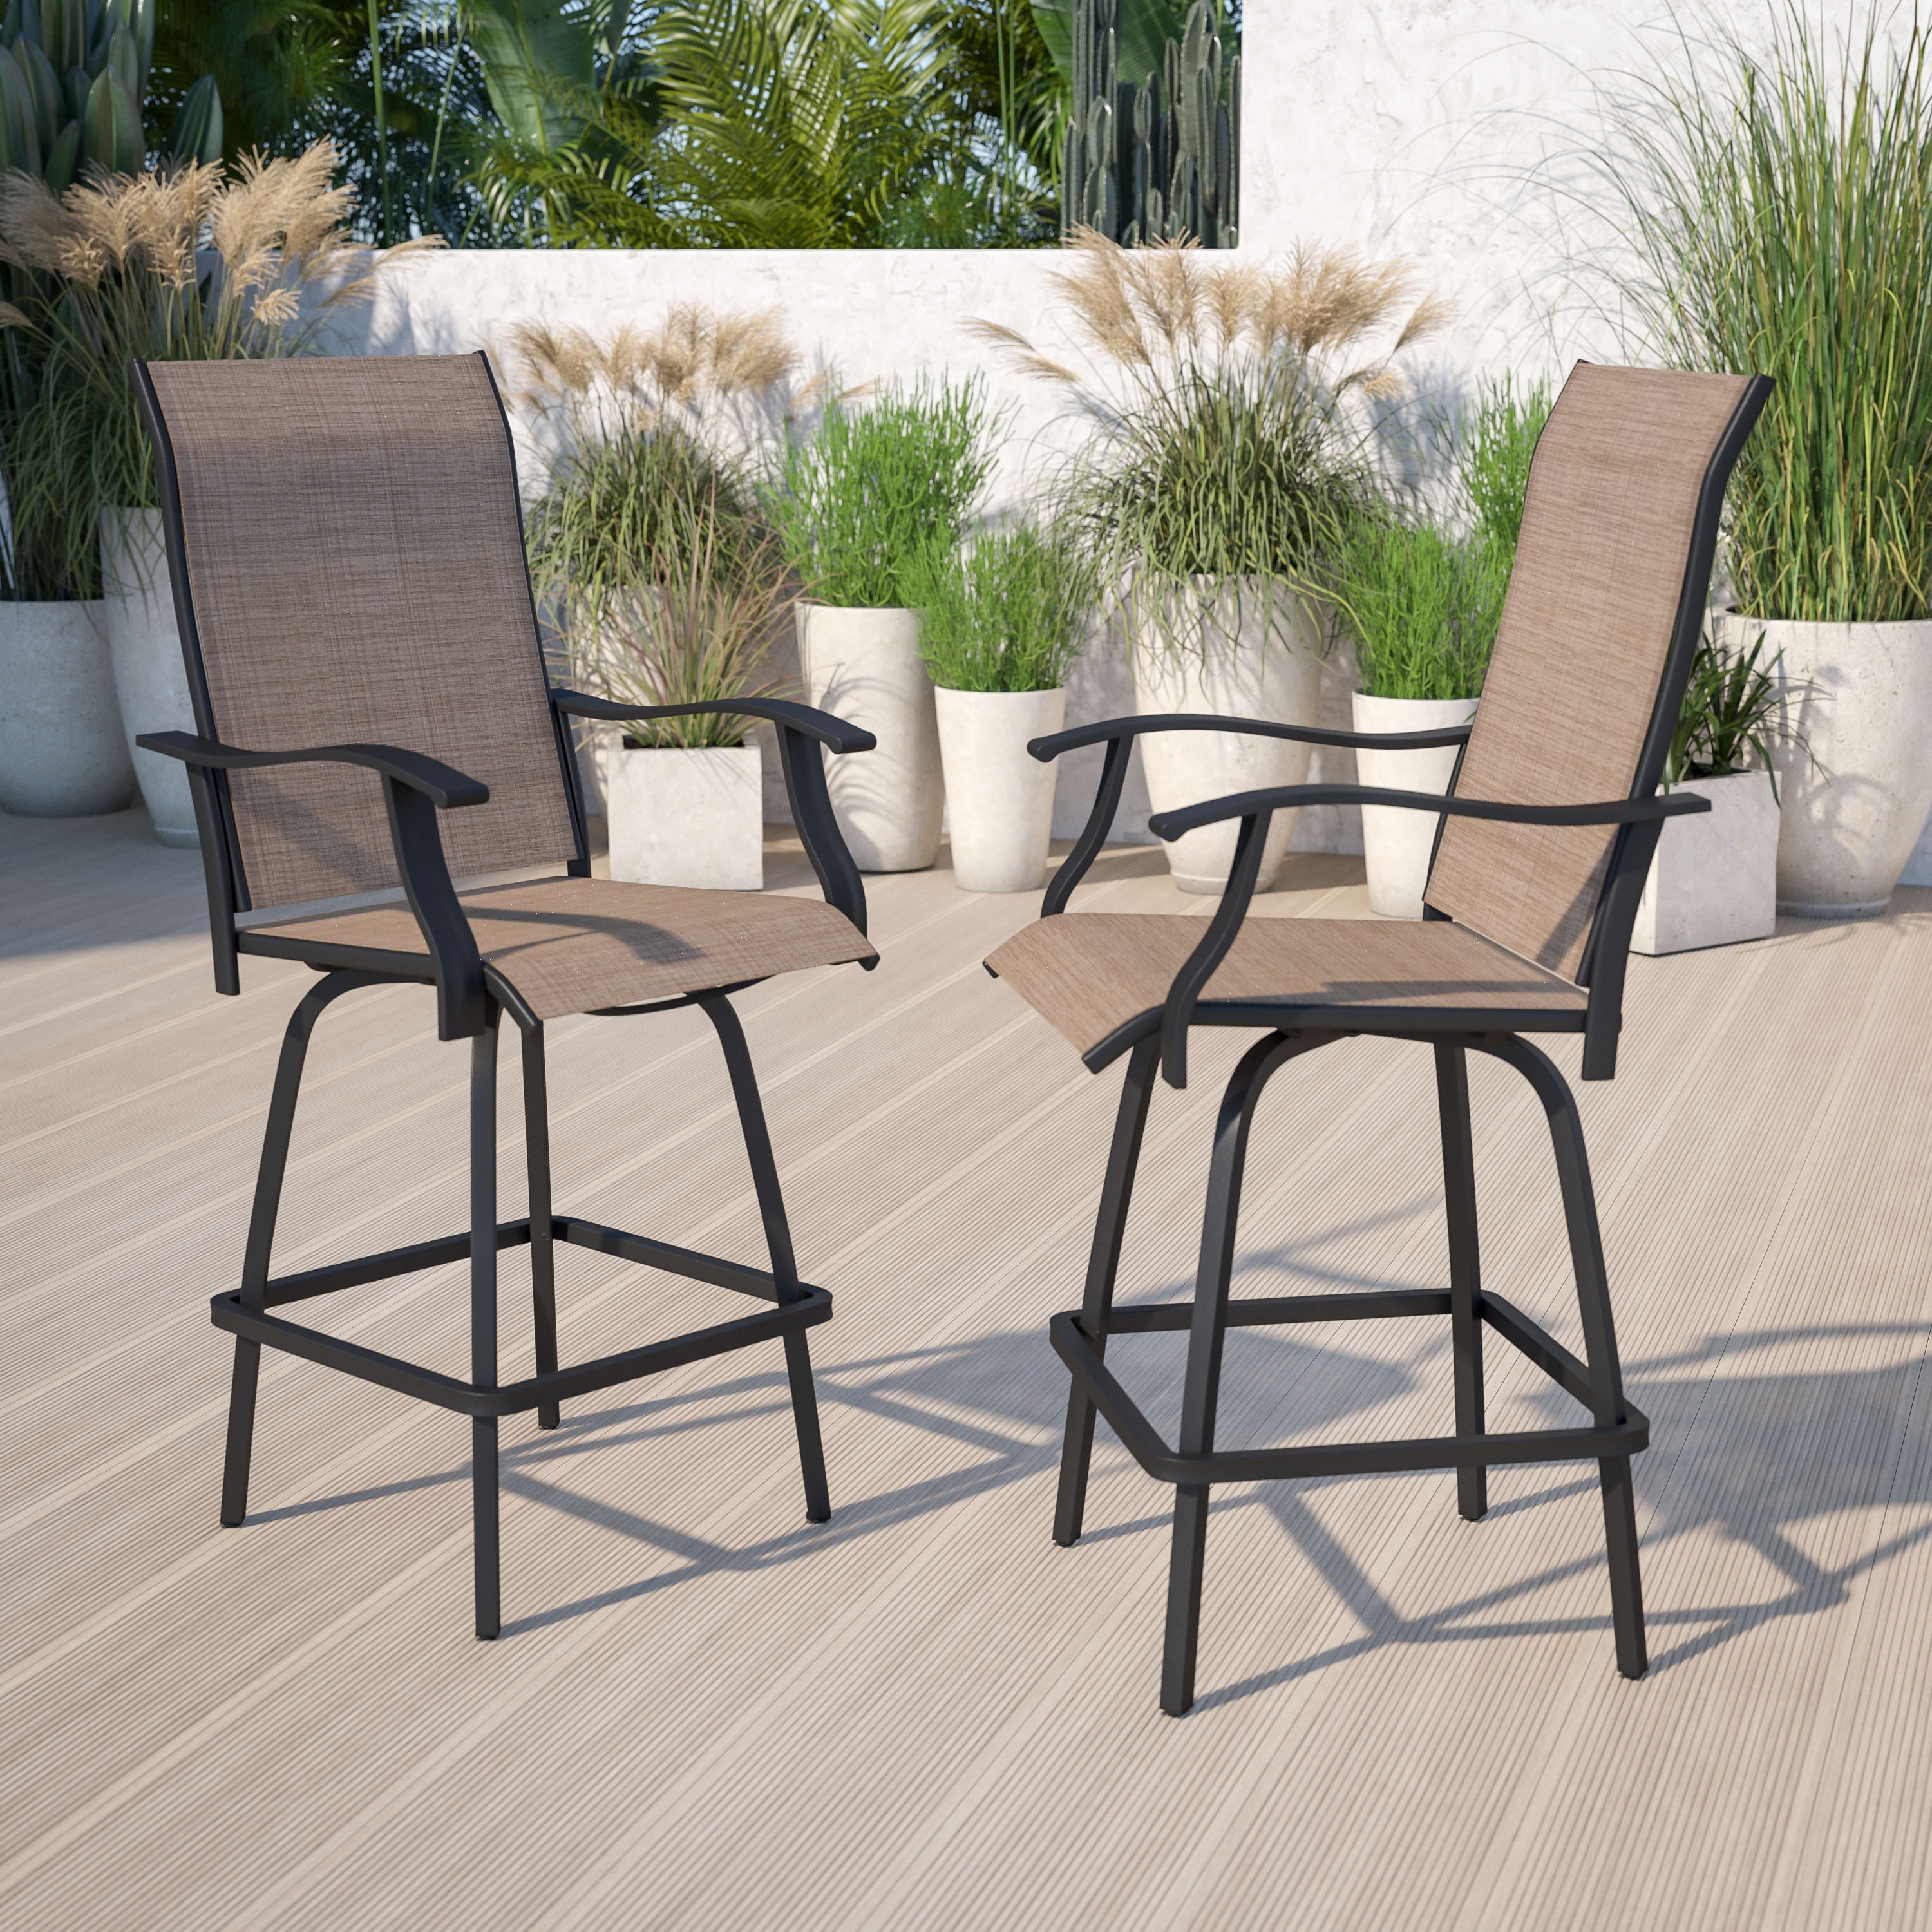 Bigroof Outdoor Swivel Bar Stools Set of 2 Bar Height Patio Chairs Padded Textilene All Weather Furniture with High Backrest and Armrest 